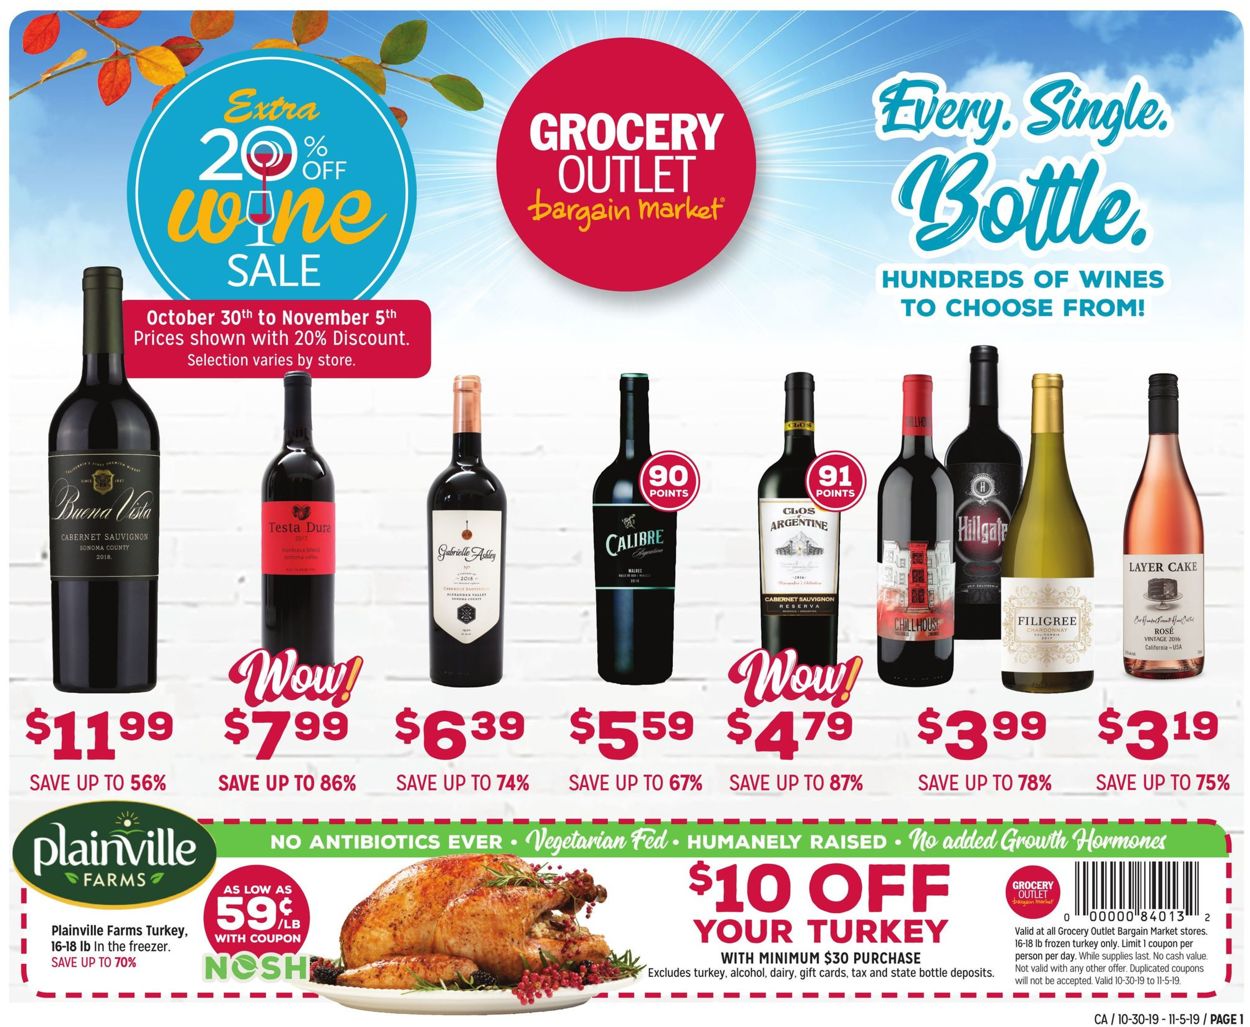 Grocery Outlet Weekly Ad Circular - valid 10/30-11/05/2019